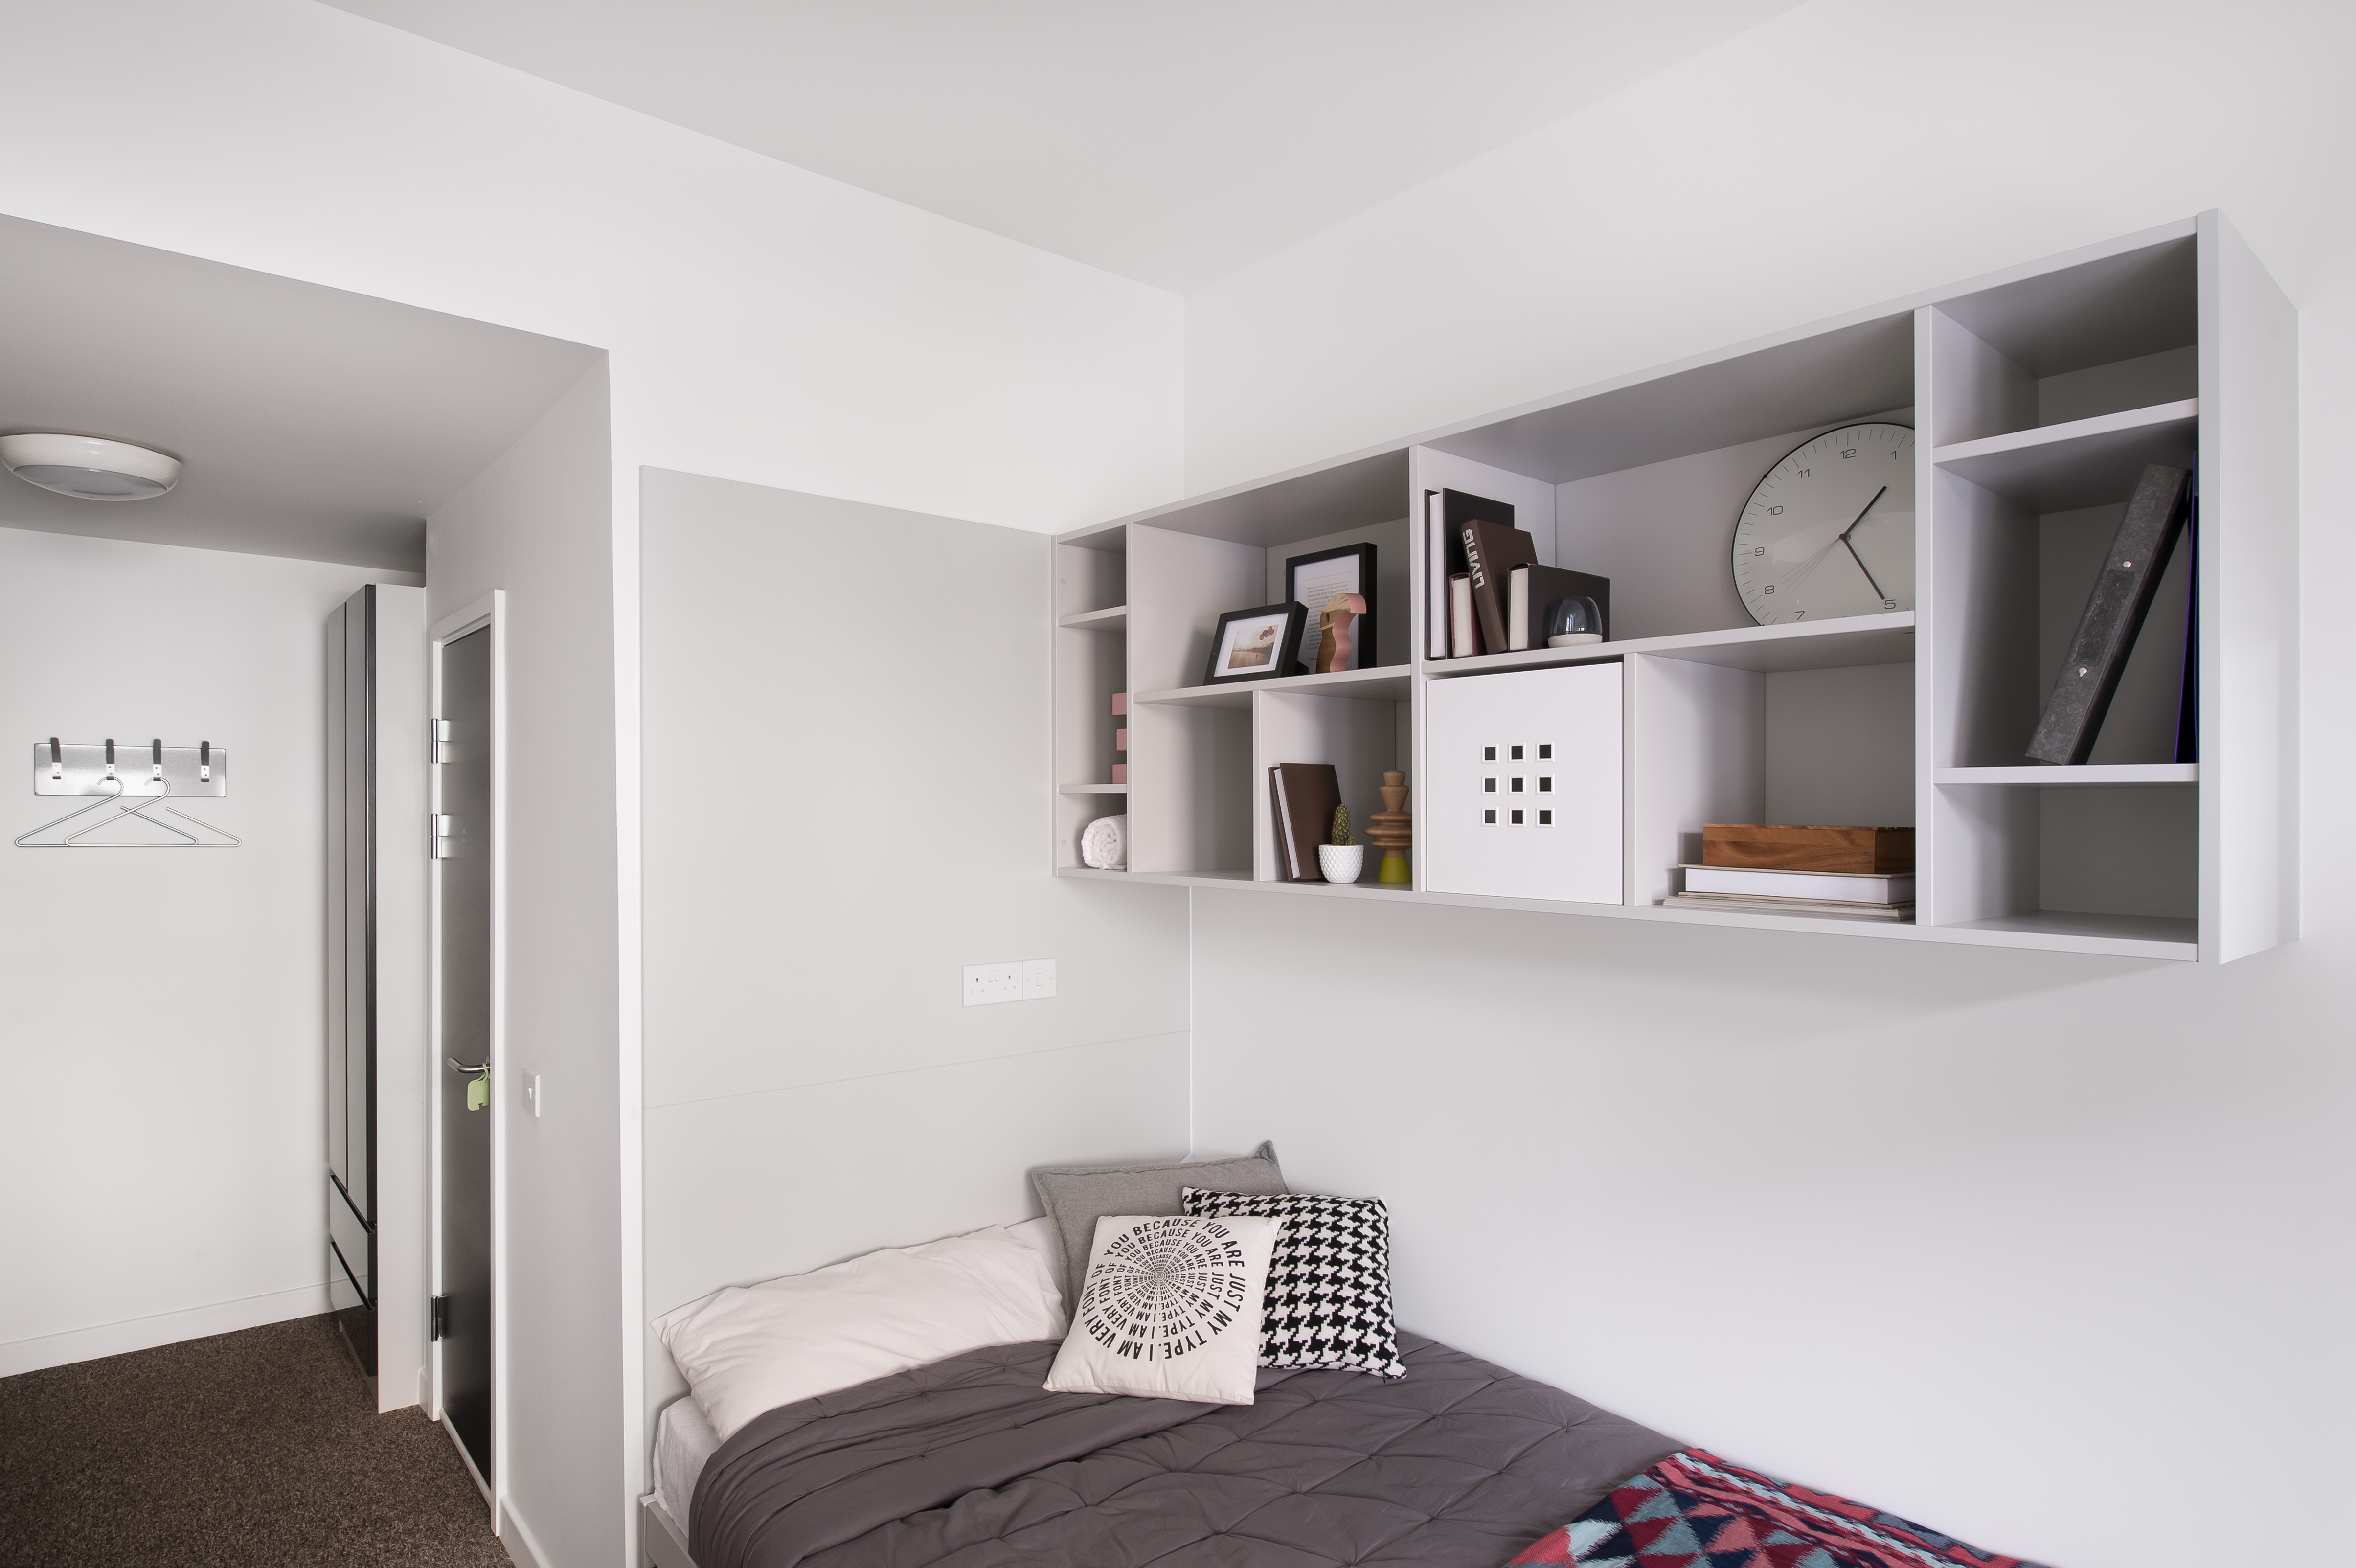 Glasgow student accommodation shared flat bedroom